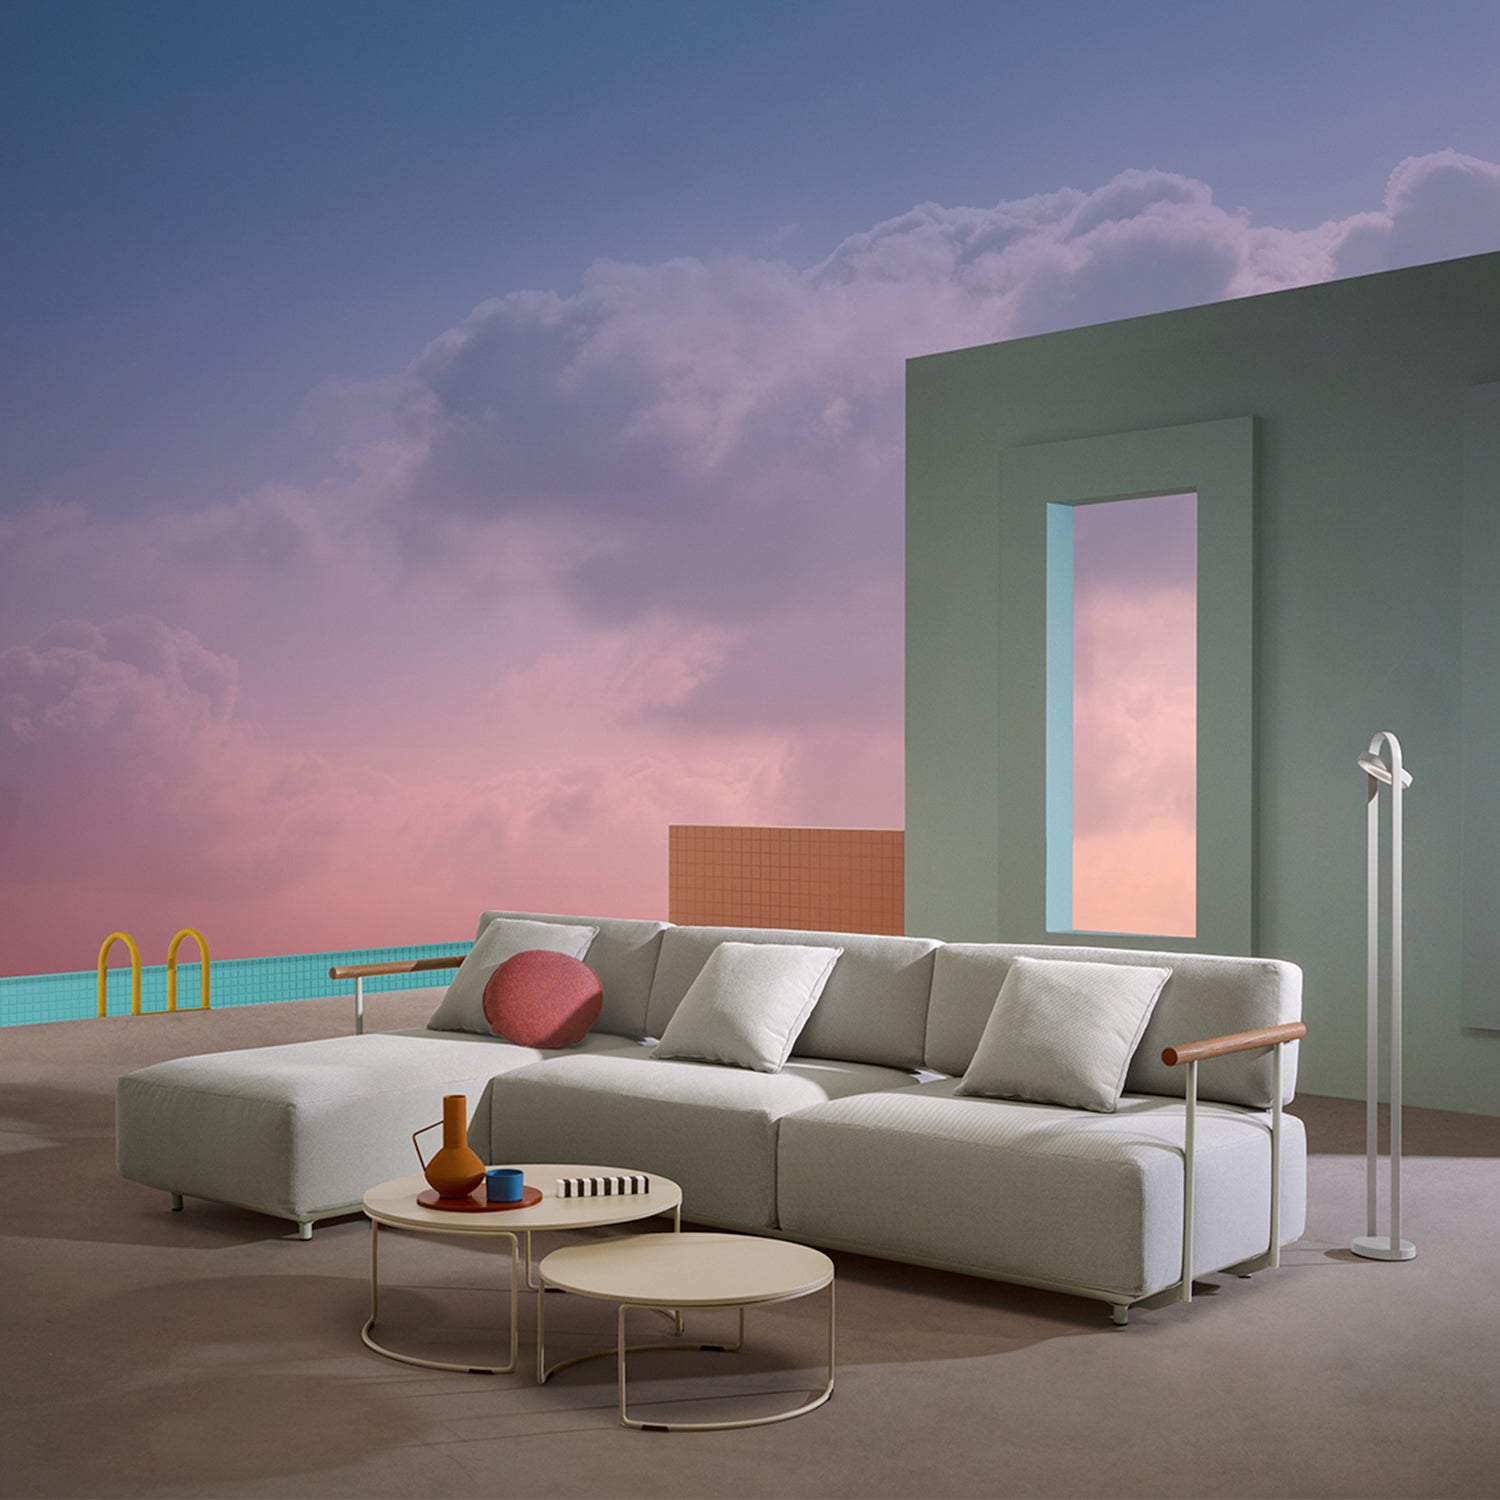 Pedrali Arki Outdoor 3 Seater Sofa in grey with a sunset int he background